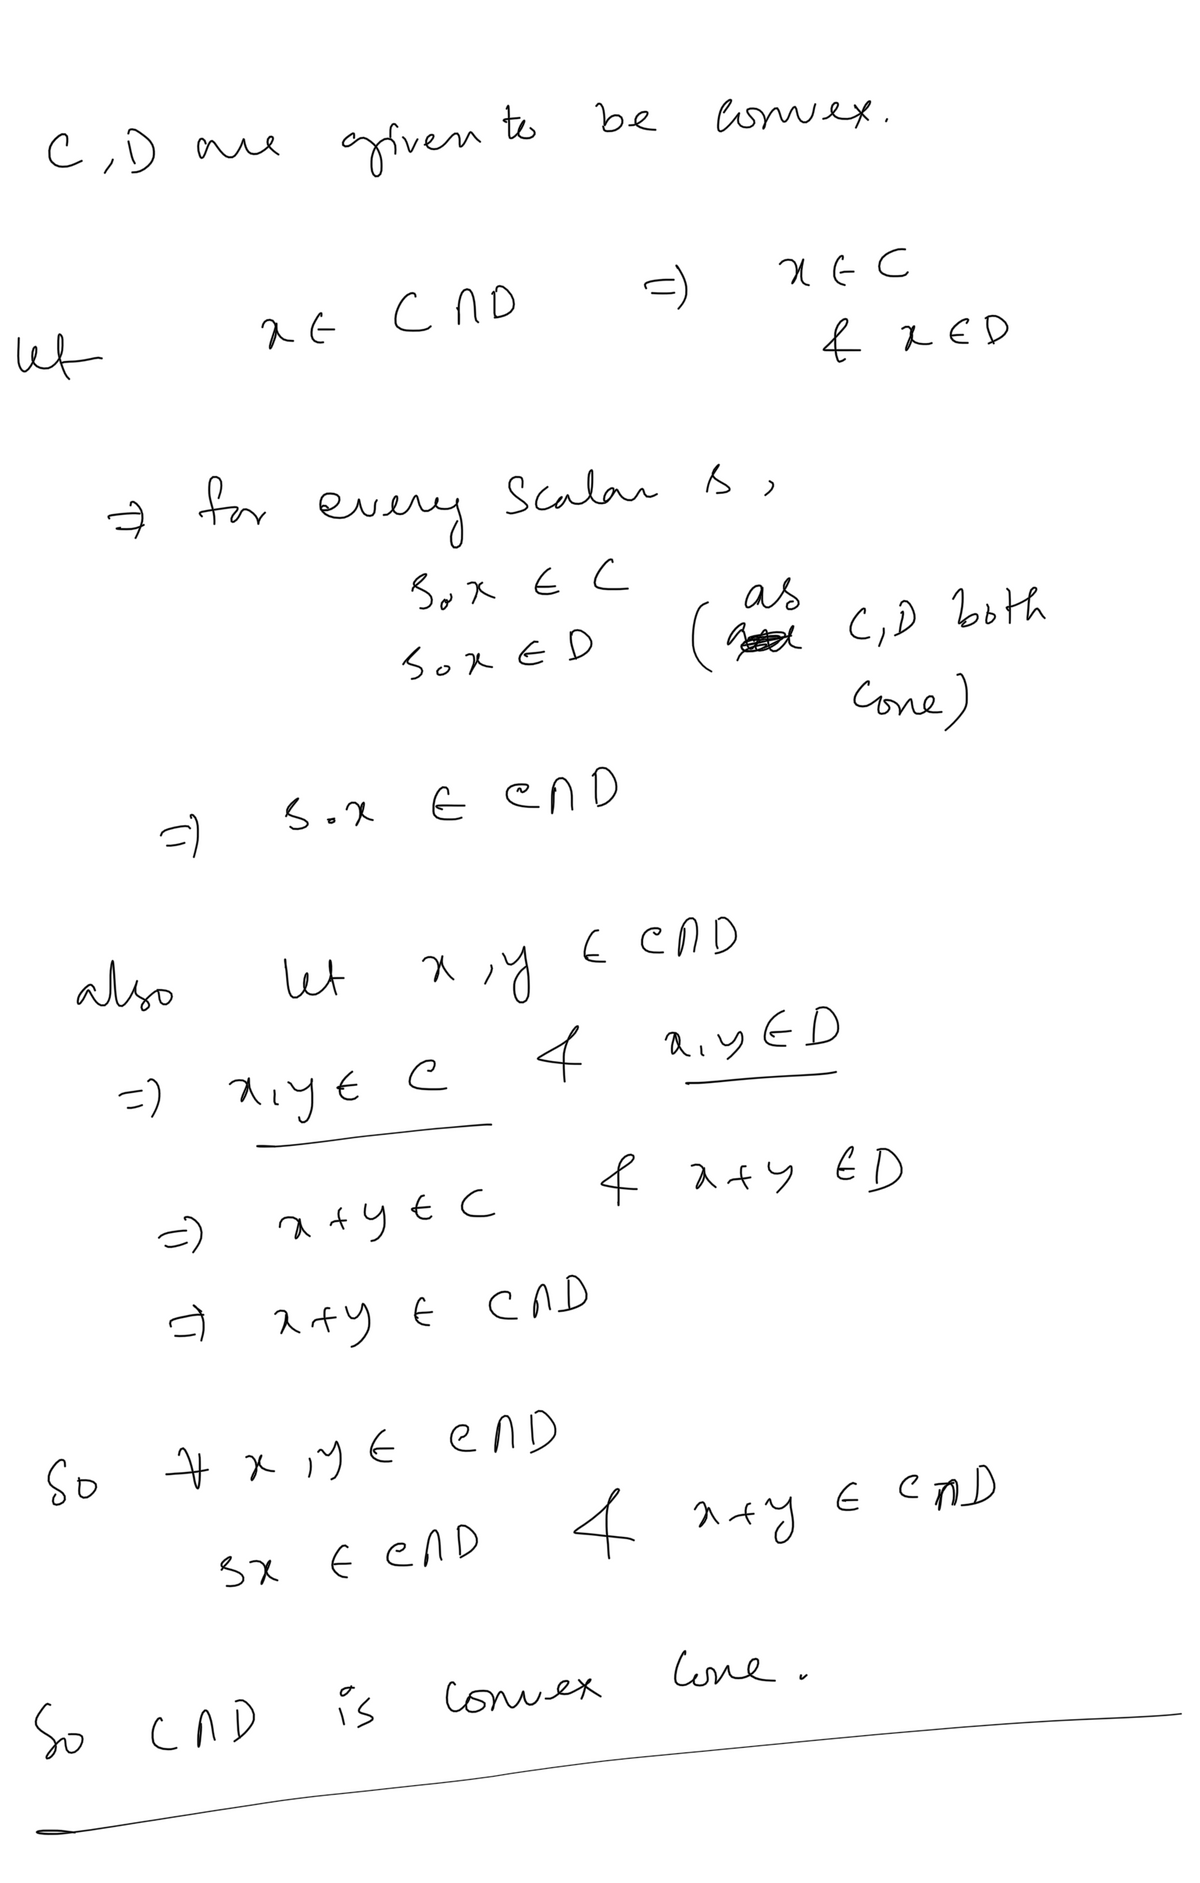 c,D ae
given to
be
comex.
ut
cno
ļ RED
for
every
Scalar s ,
Box E c
as
( C,D both
cone)
SoxED
E enD
also
let
E CnD
-) スiye e
aiy ED
4 ス4y ED
a ty € c
コ
スイy e
E cAD
So + x y € enD
E enD
3X E enD
cone.
So CAD
cn D
is
convex
